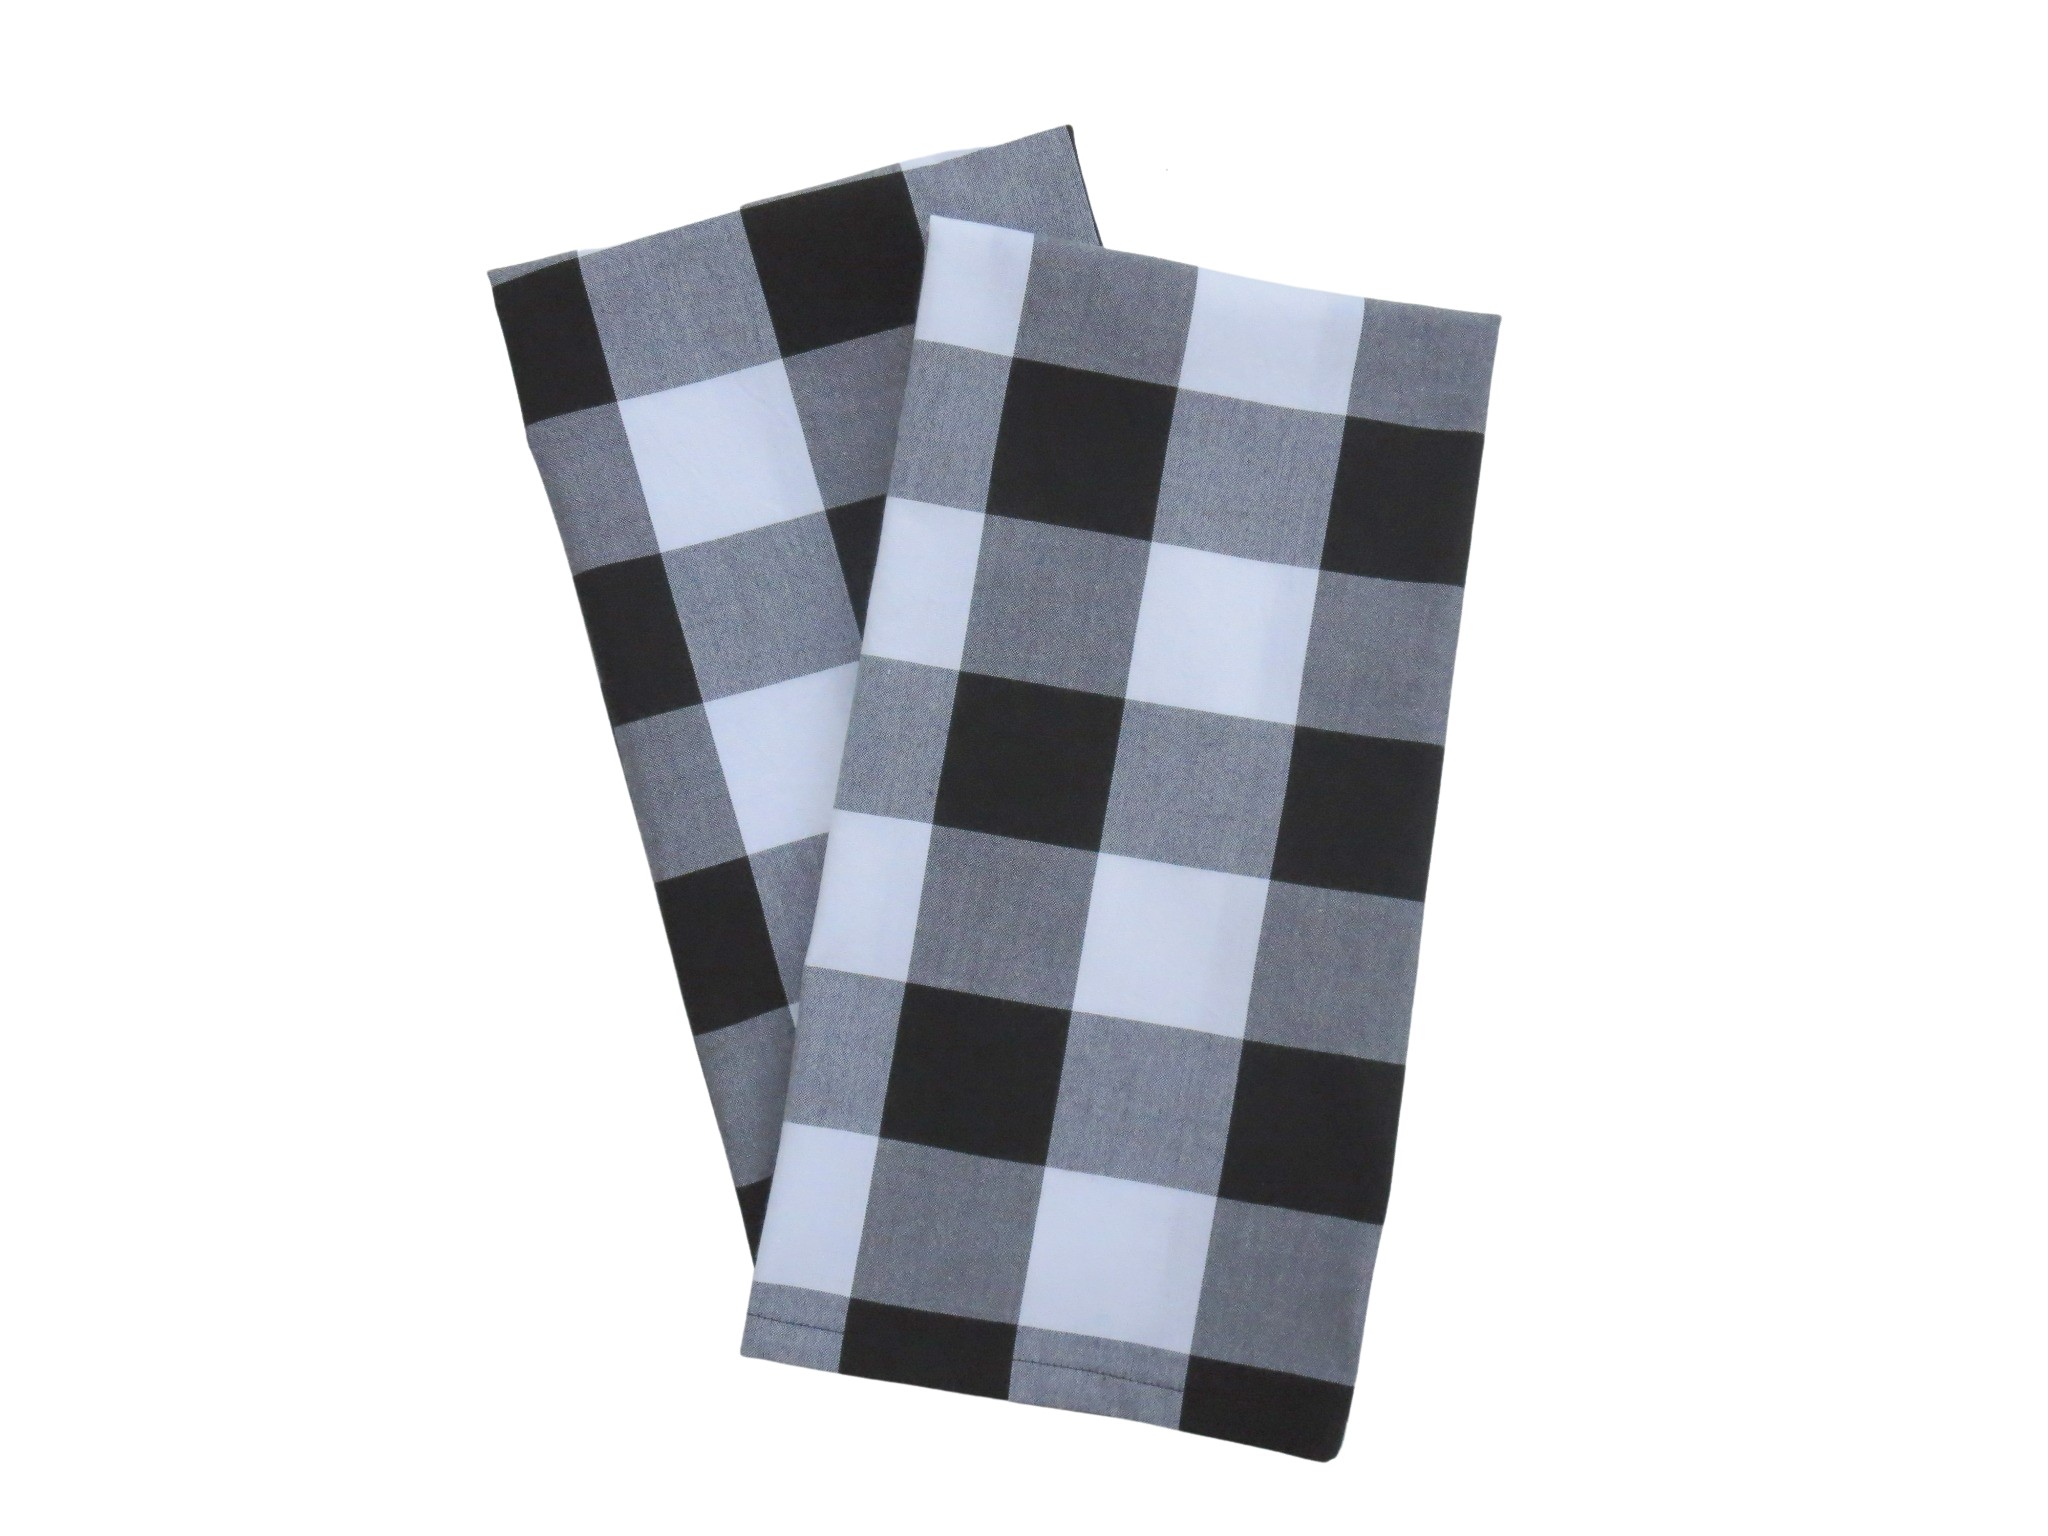 https://www.stitchedbybeverly.com/sites/stitchedbybeverly.indiemade.com/files/black_white_gray_buffalo_plaid_tea_towels_set_of_2.jpg